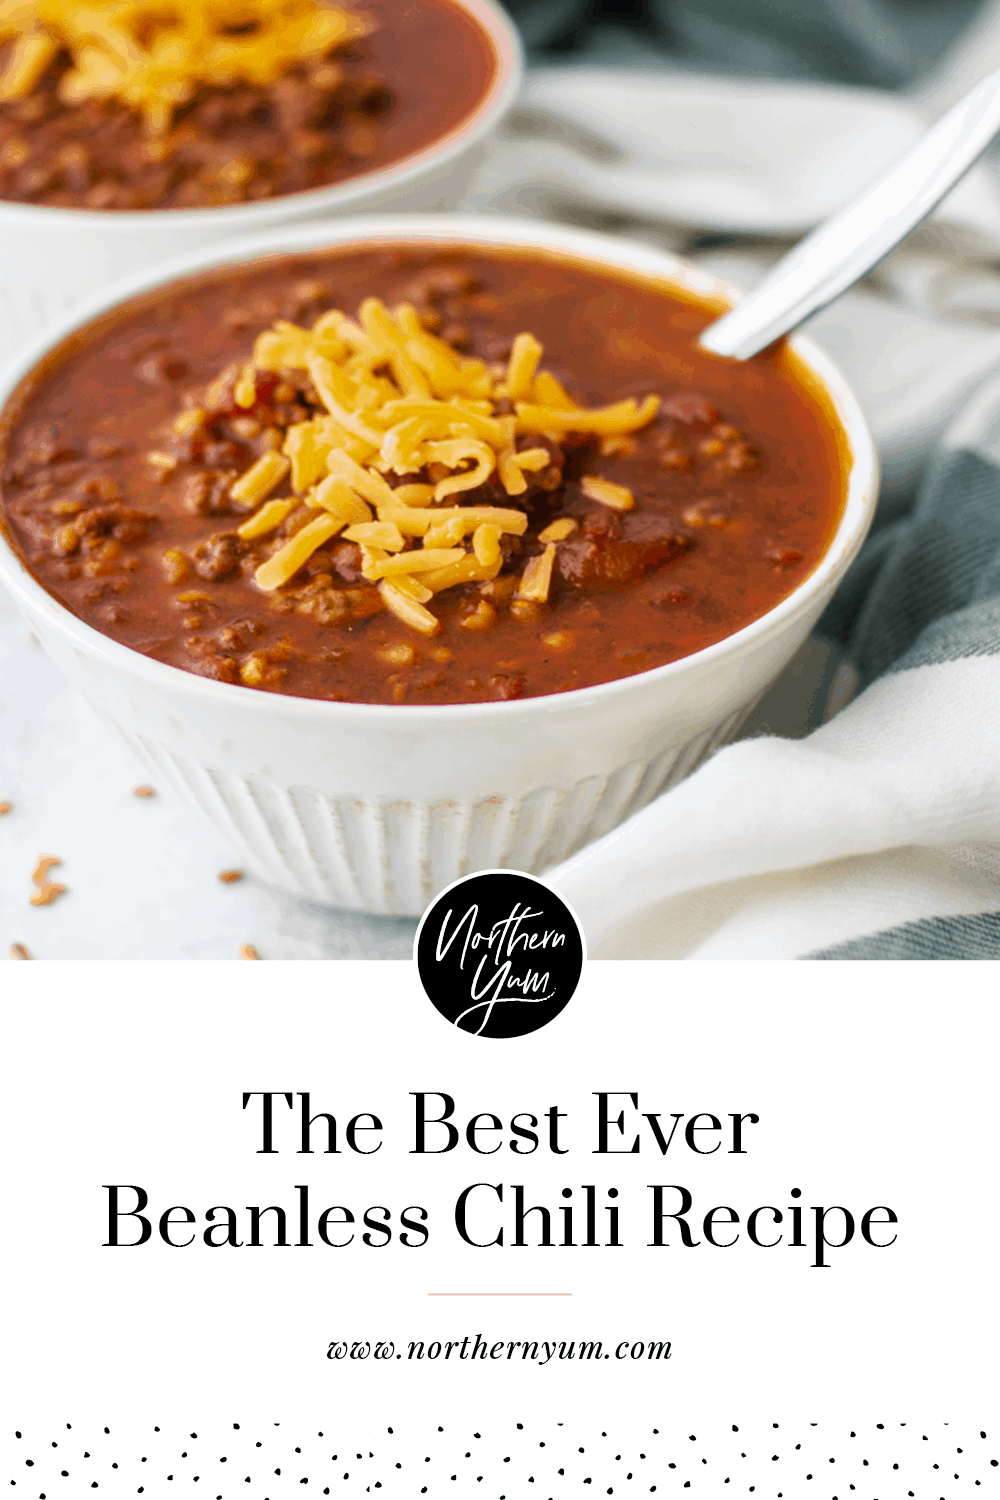 Hearty Wheat Berry Chili with Beef (A Delicious No-Bean Chili!)